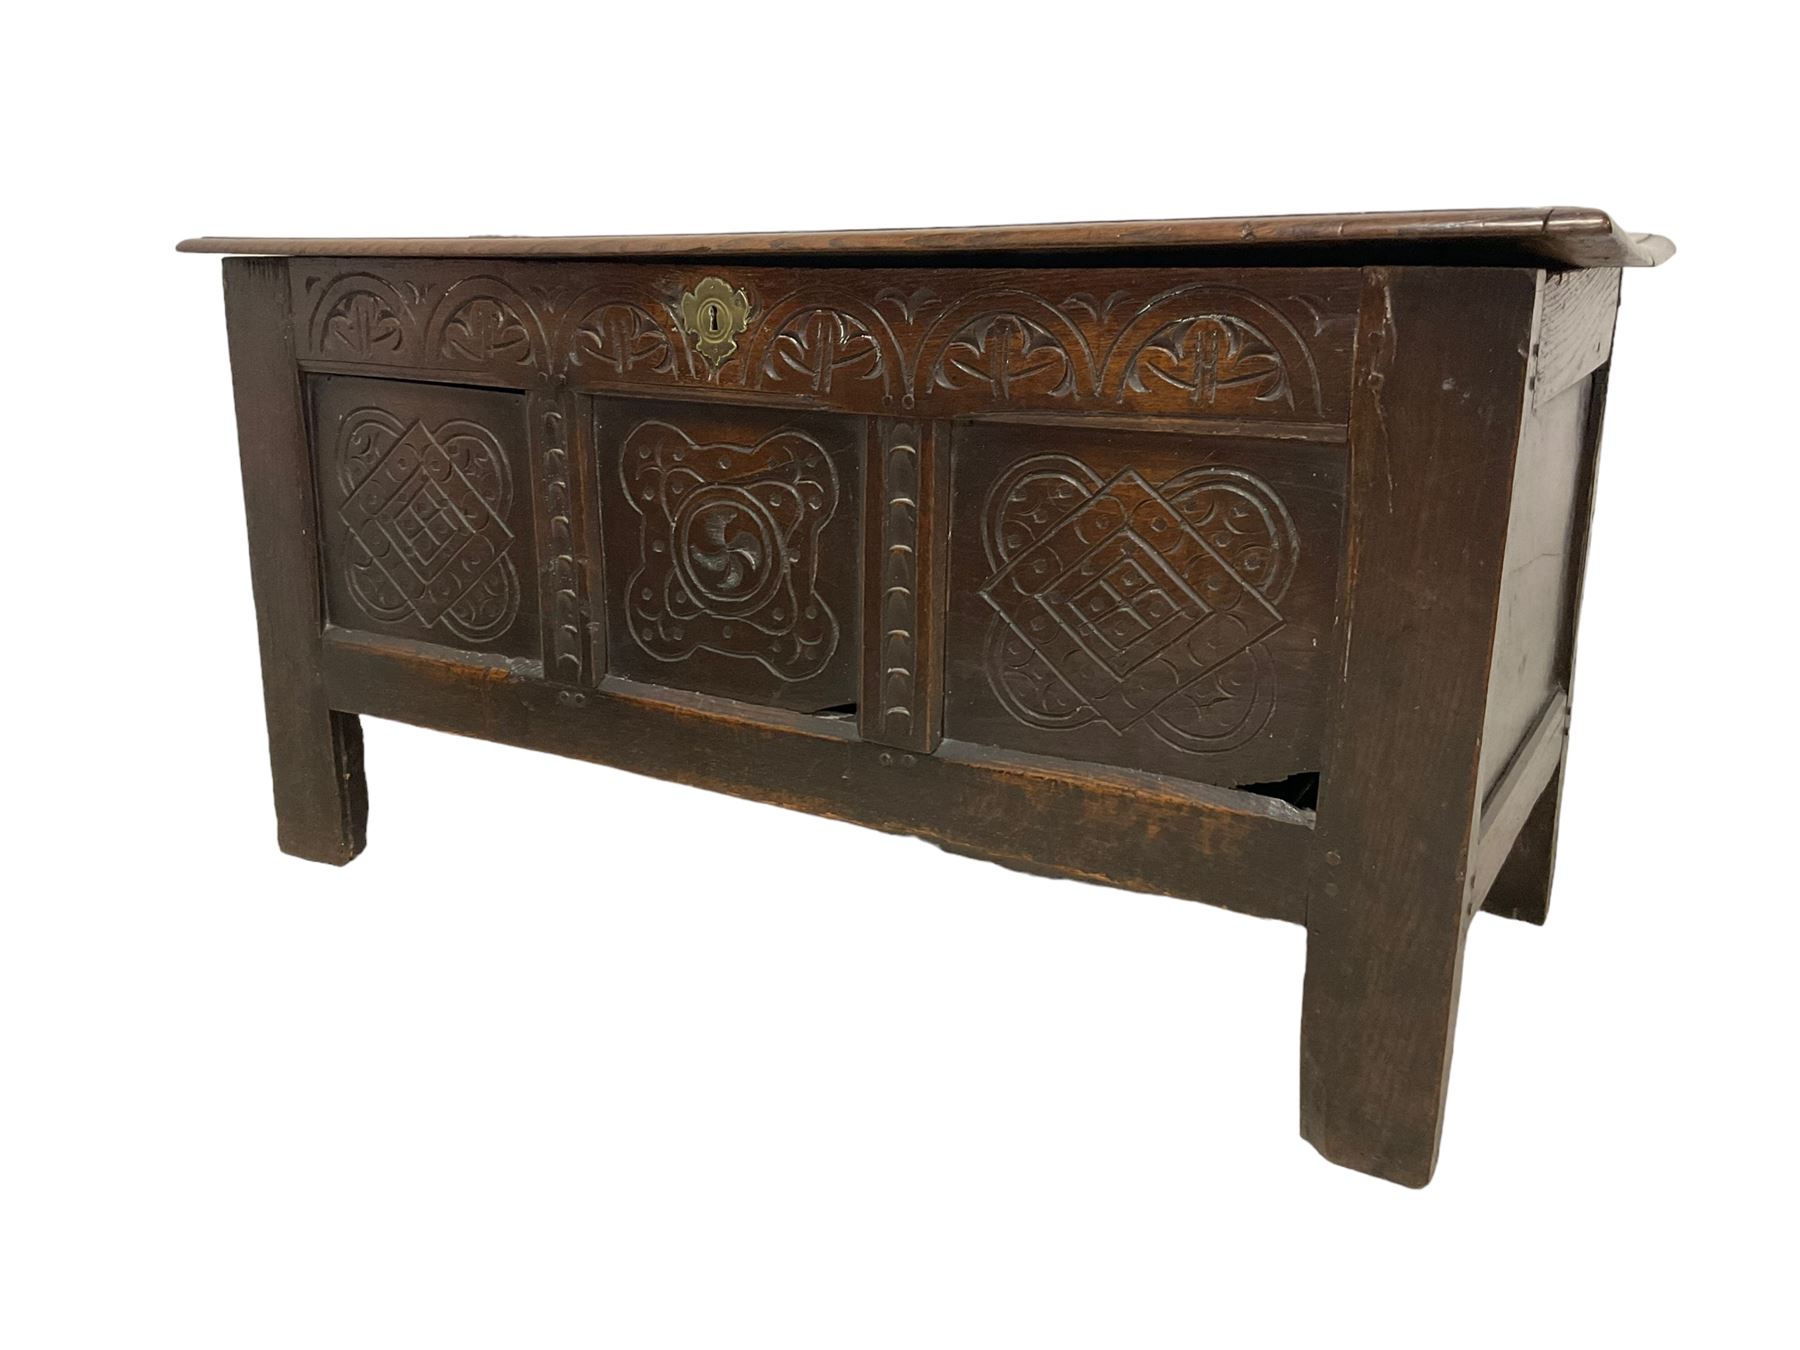 18th century oak coffer or chest - Image 6 of 6